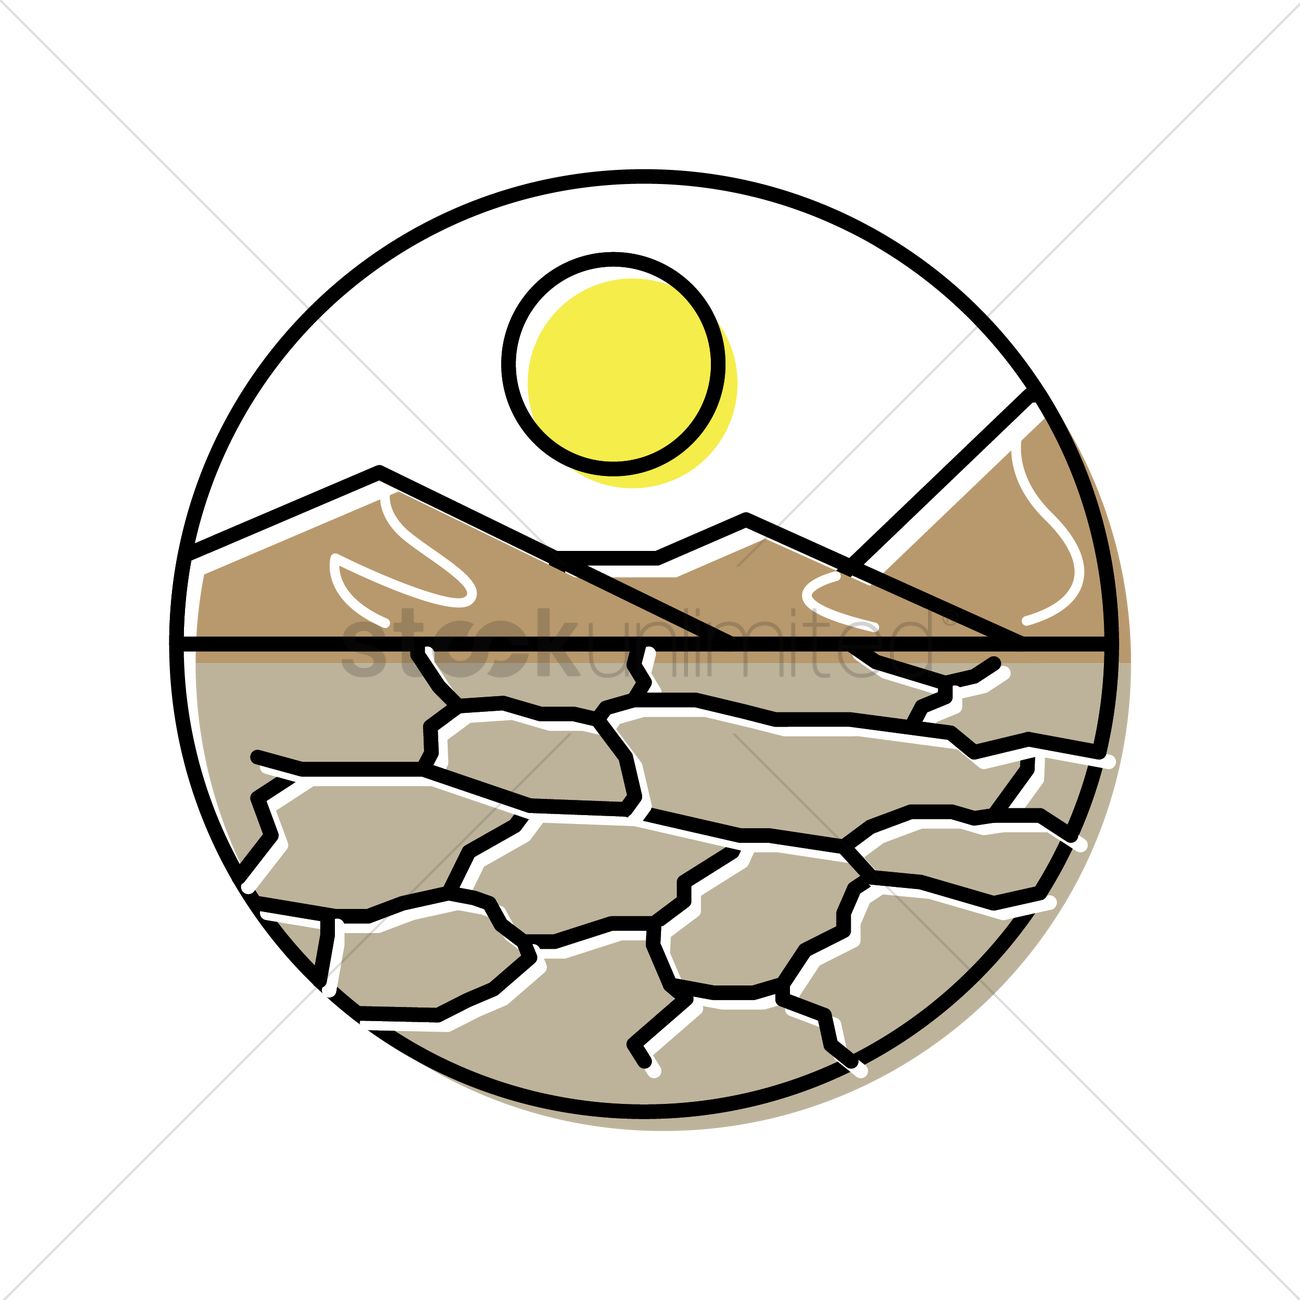 Drought Vector Image.